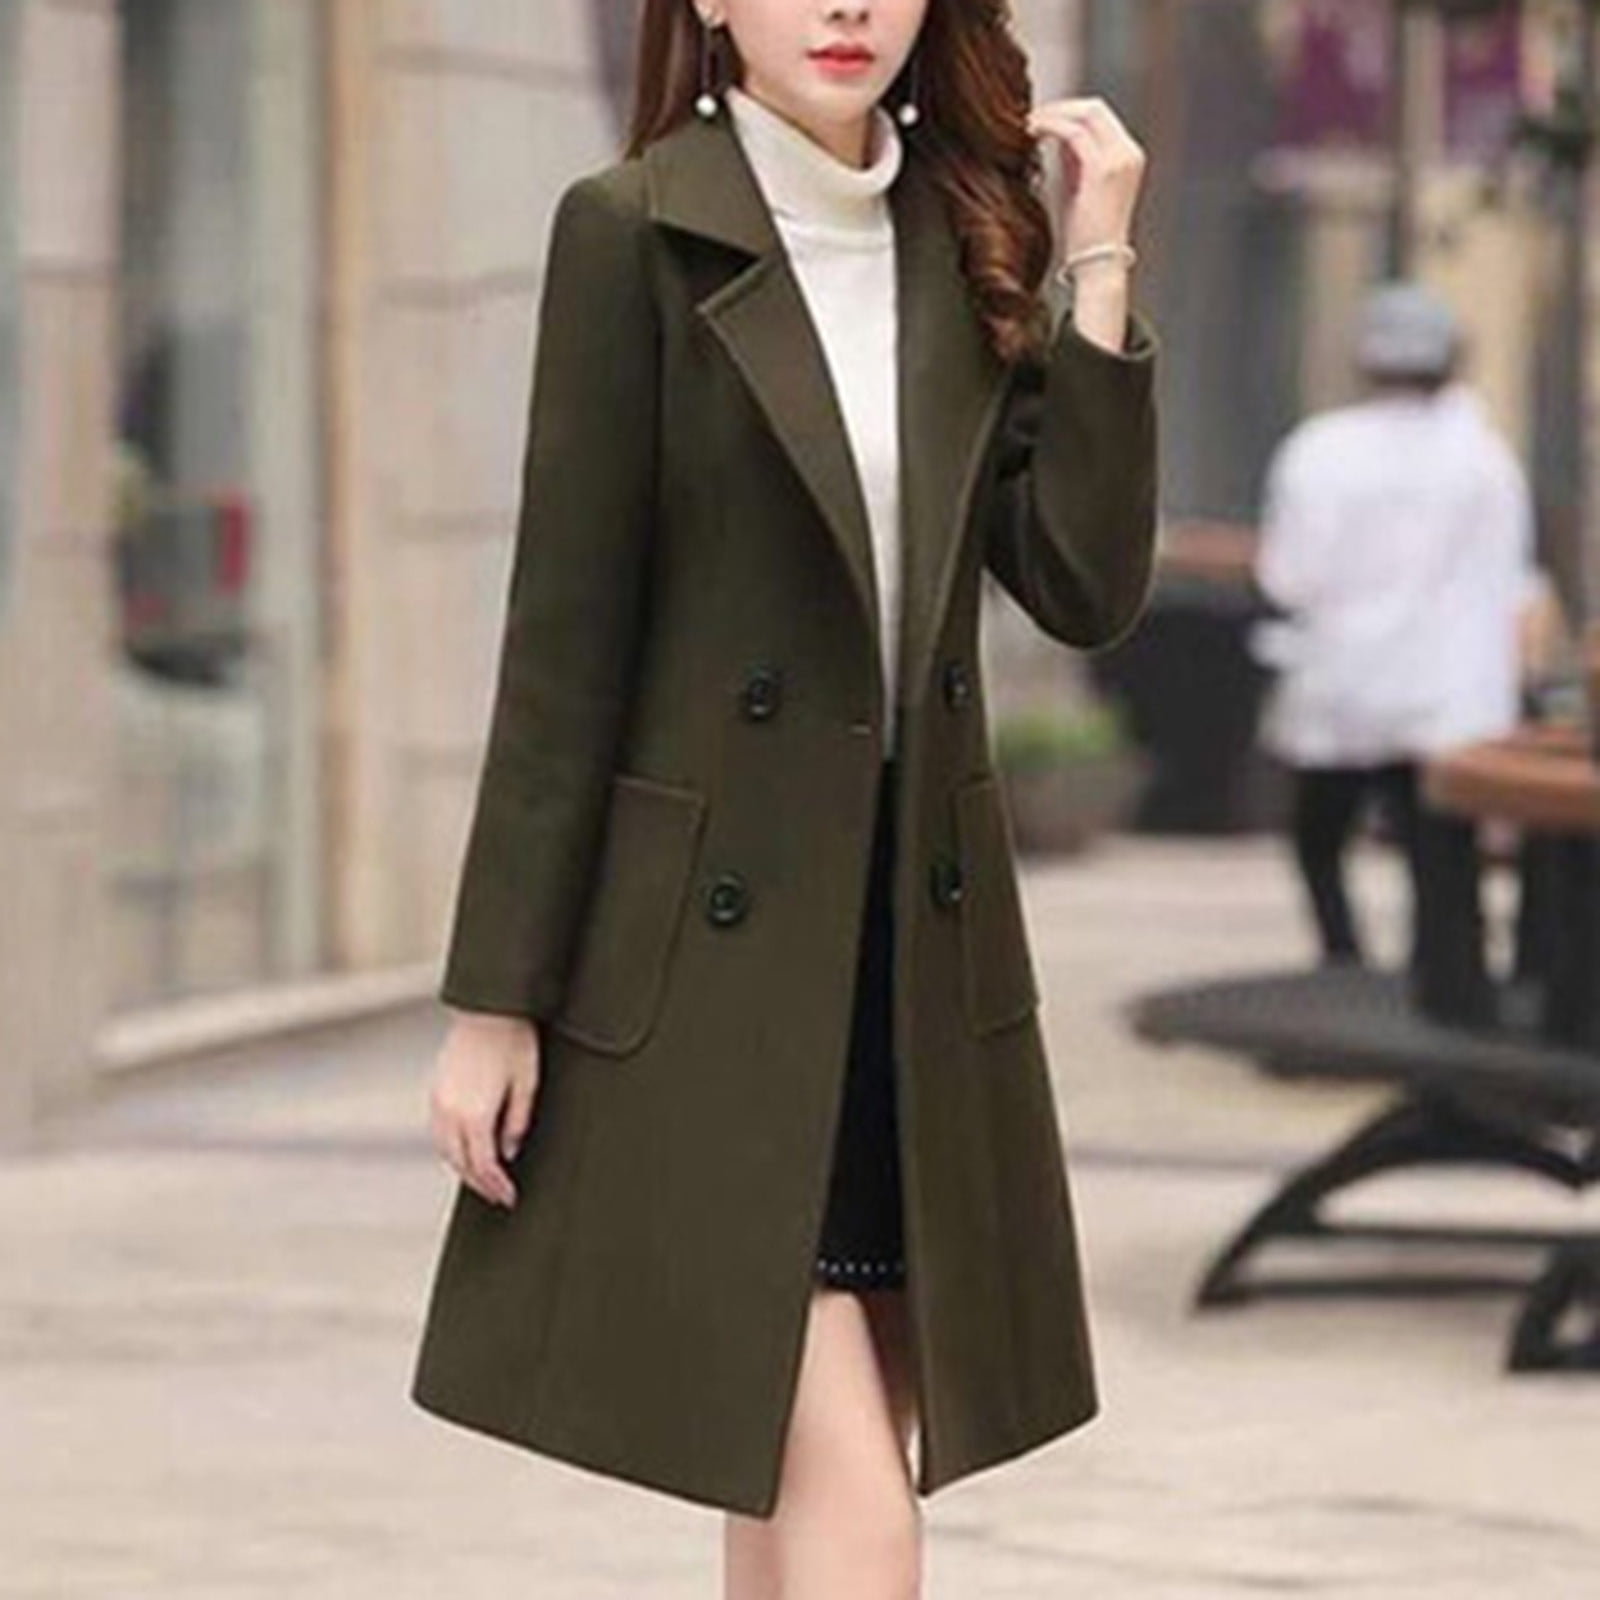 Women's Fall Winter Button Sherbet Cotton Lined Barn Jacket Pocket Trench  Coat with Corduroy Details